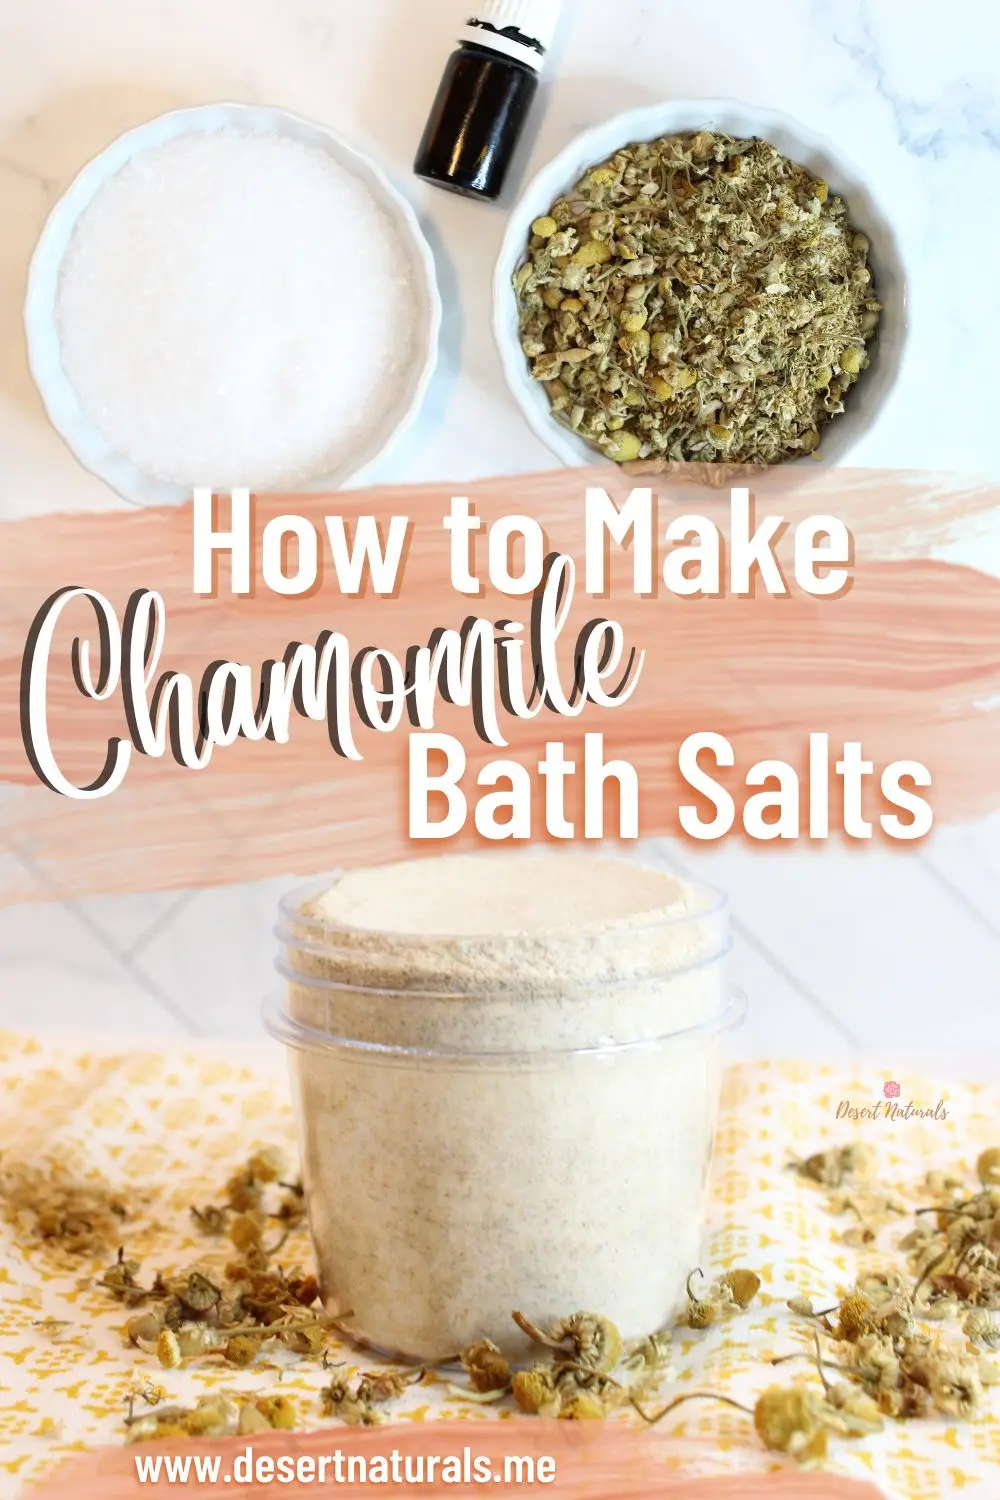 photo of epsom salt, chamomile flowers and homemade chamomile bath salts with text how to make chamomile bath salts